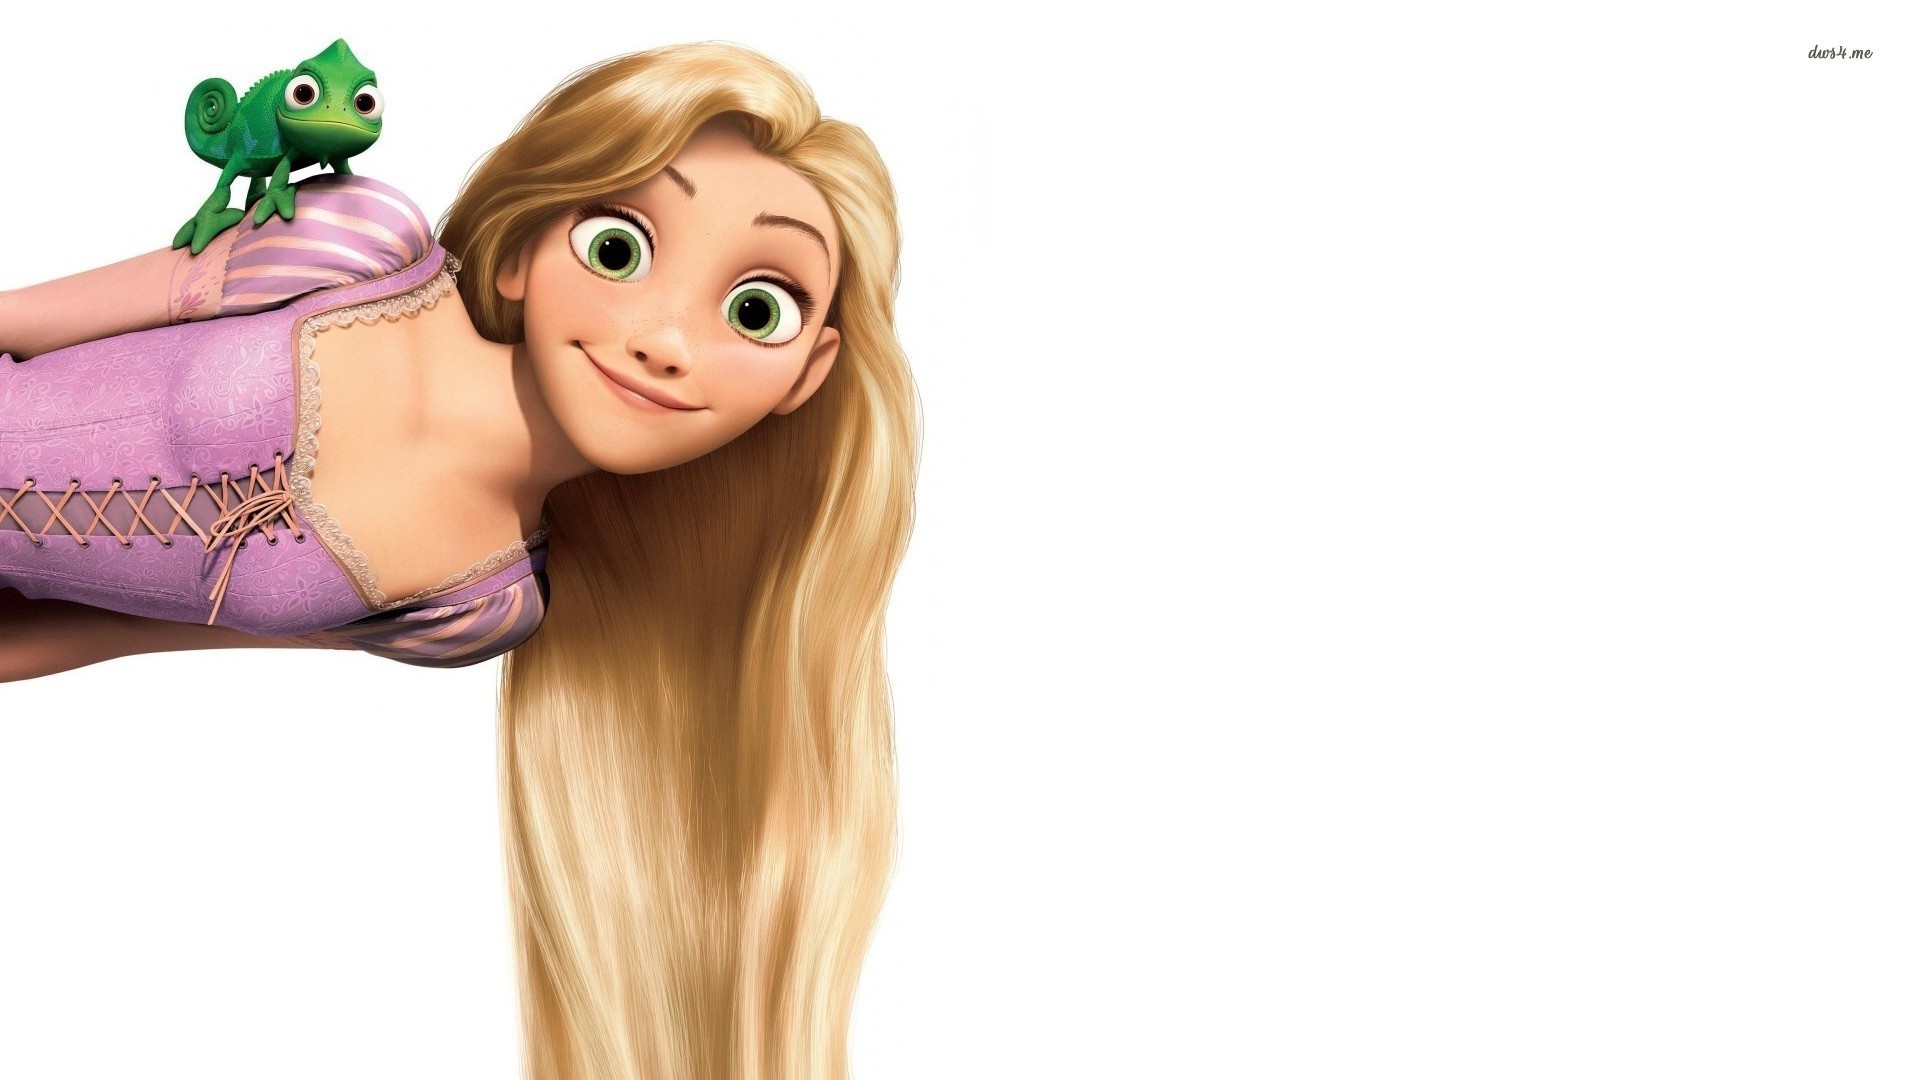 1920x1080 Pascal and Rapunzel in Tangled wallpaper - Cartoon wallpapers - #44450